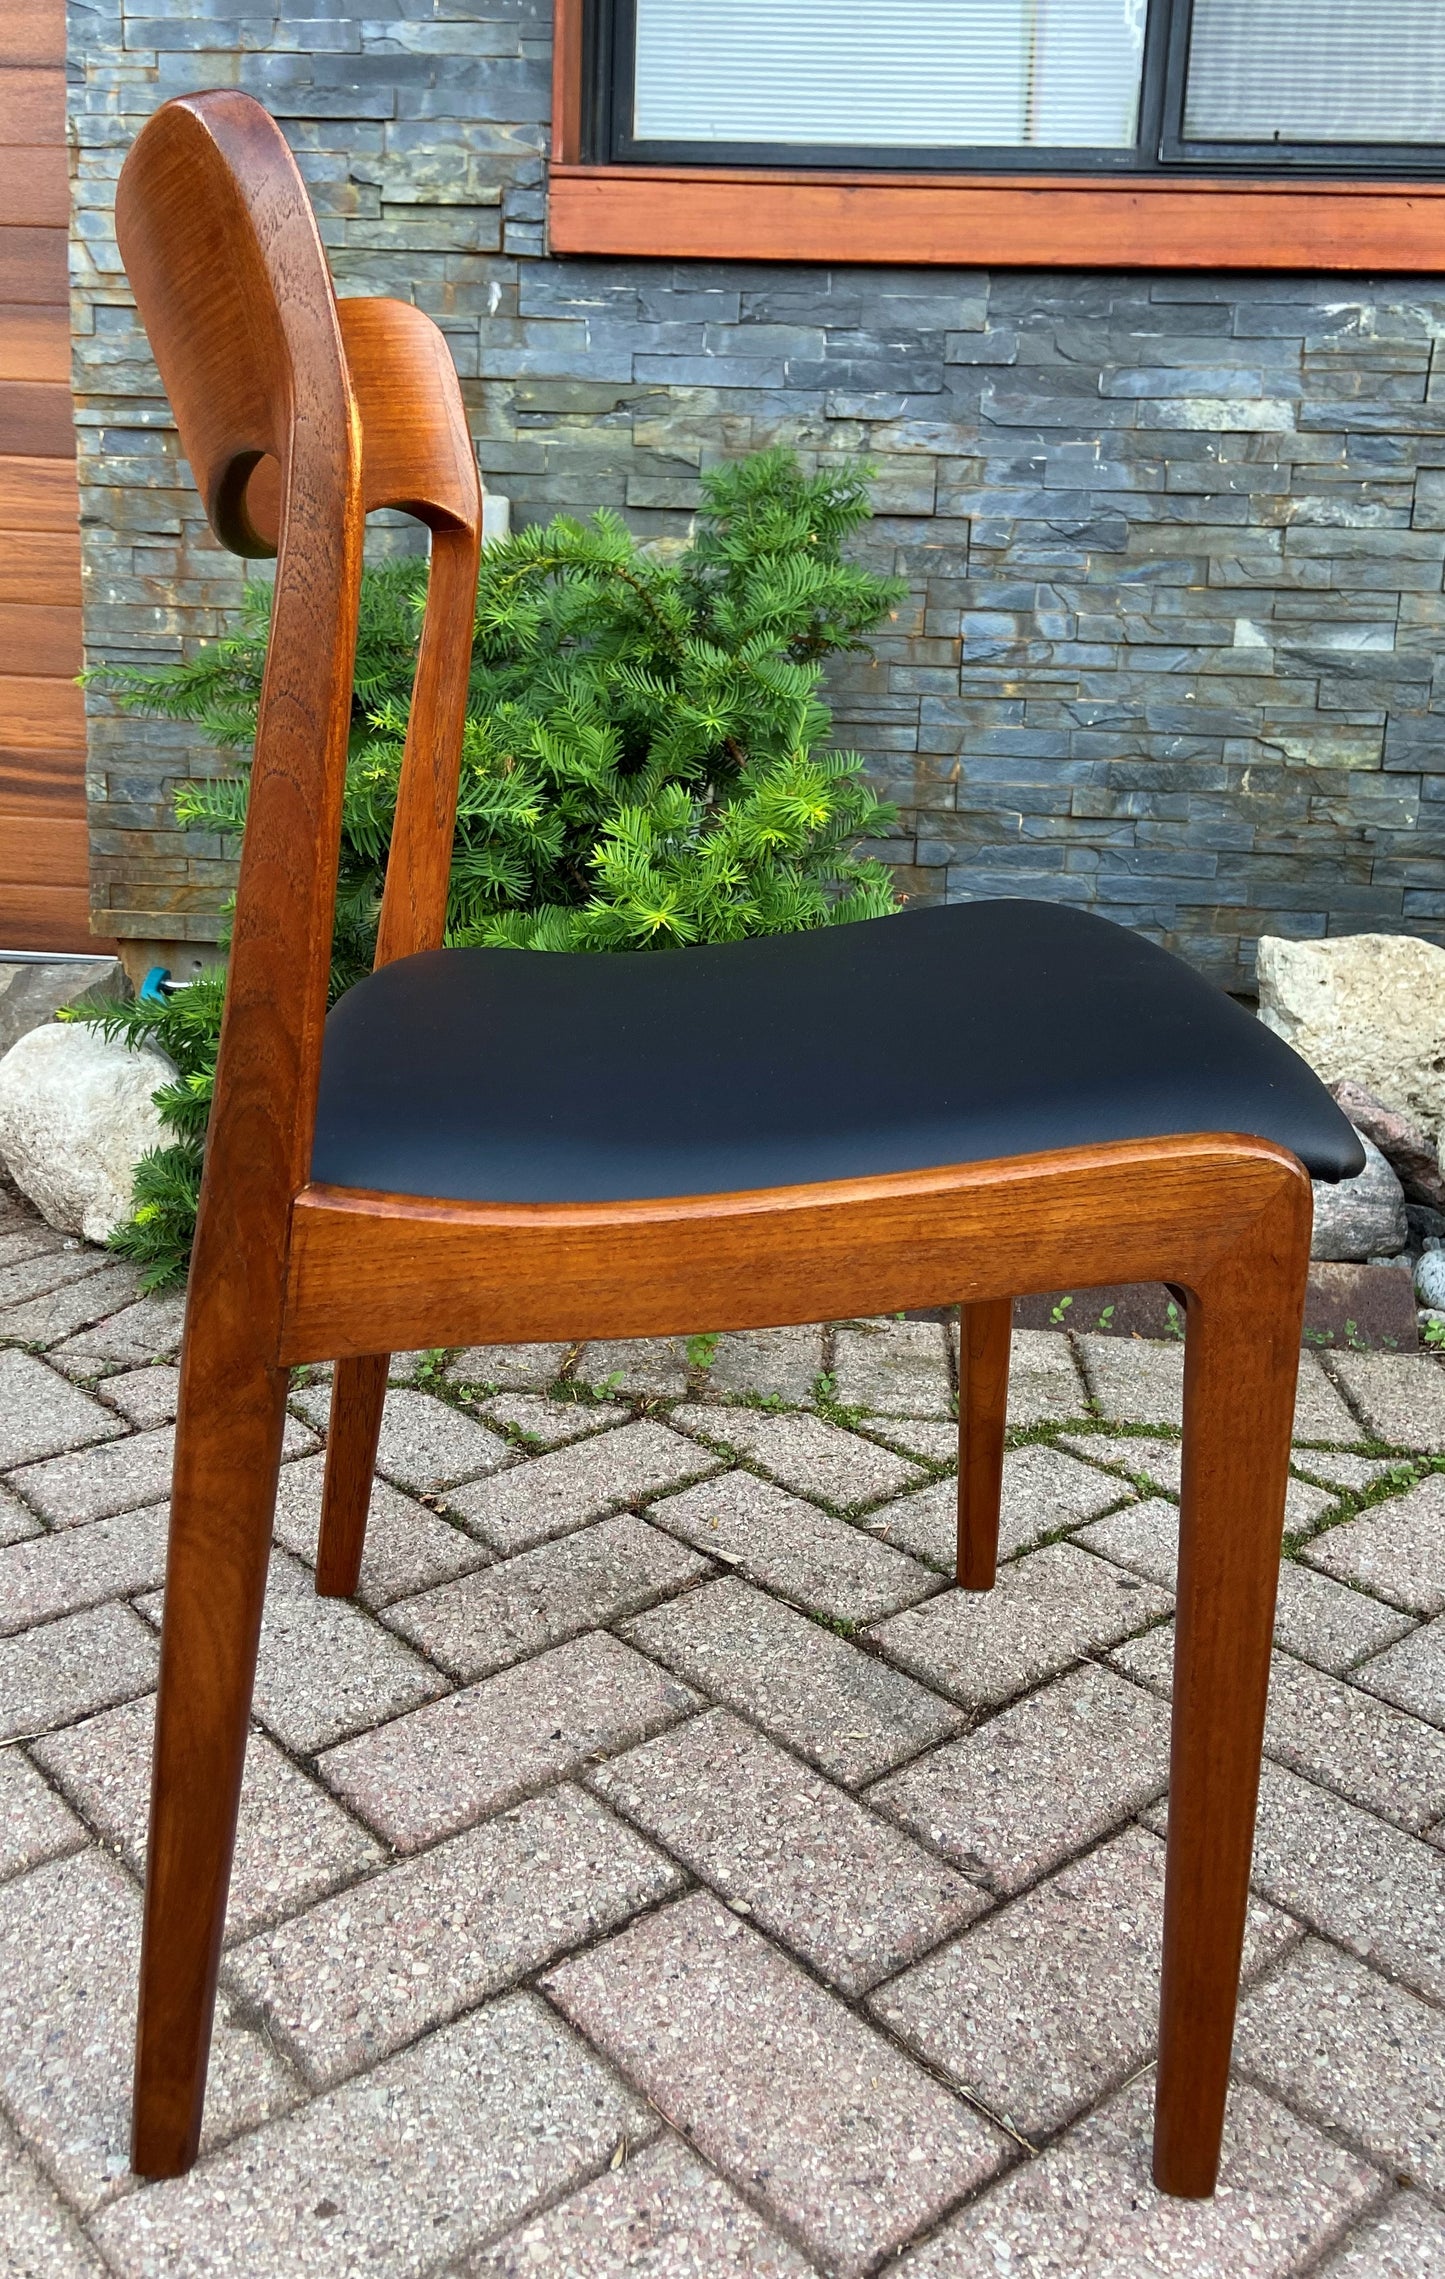 Single REFINISHED REUPHOLSTERED Danish Mid Century Modern Teak Chair, Moller style